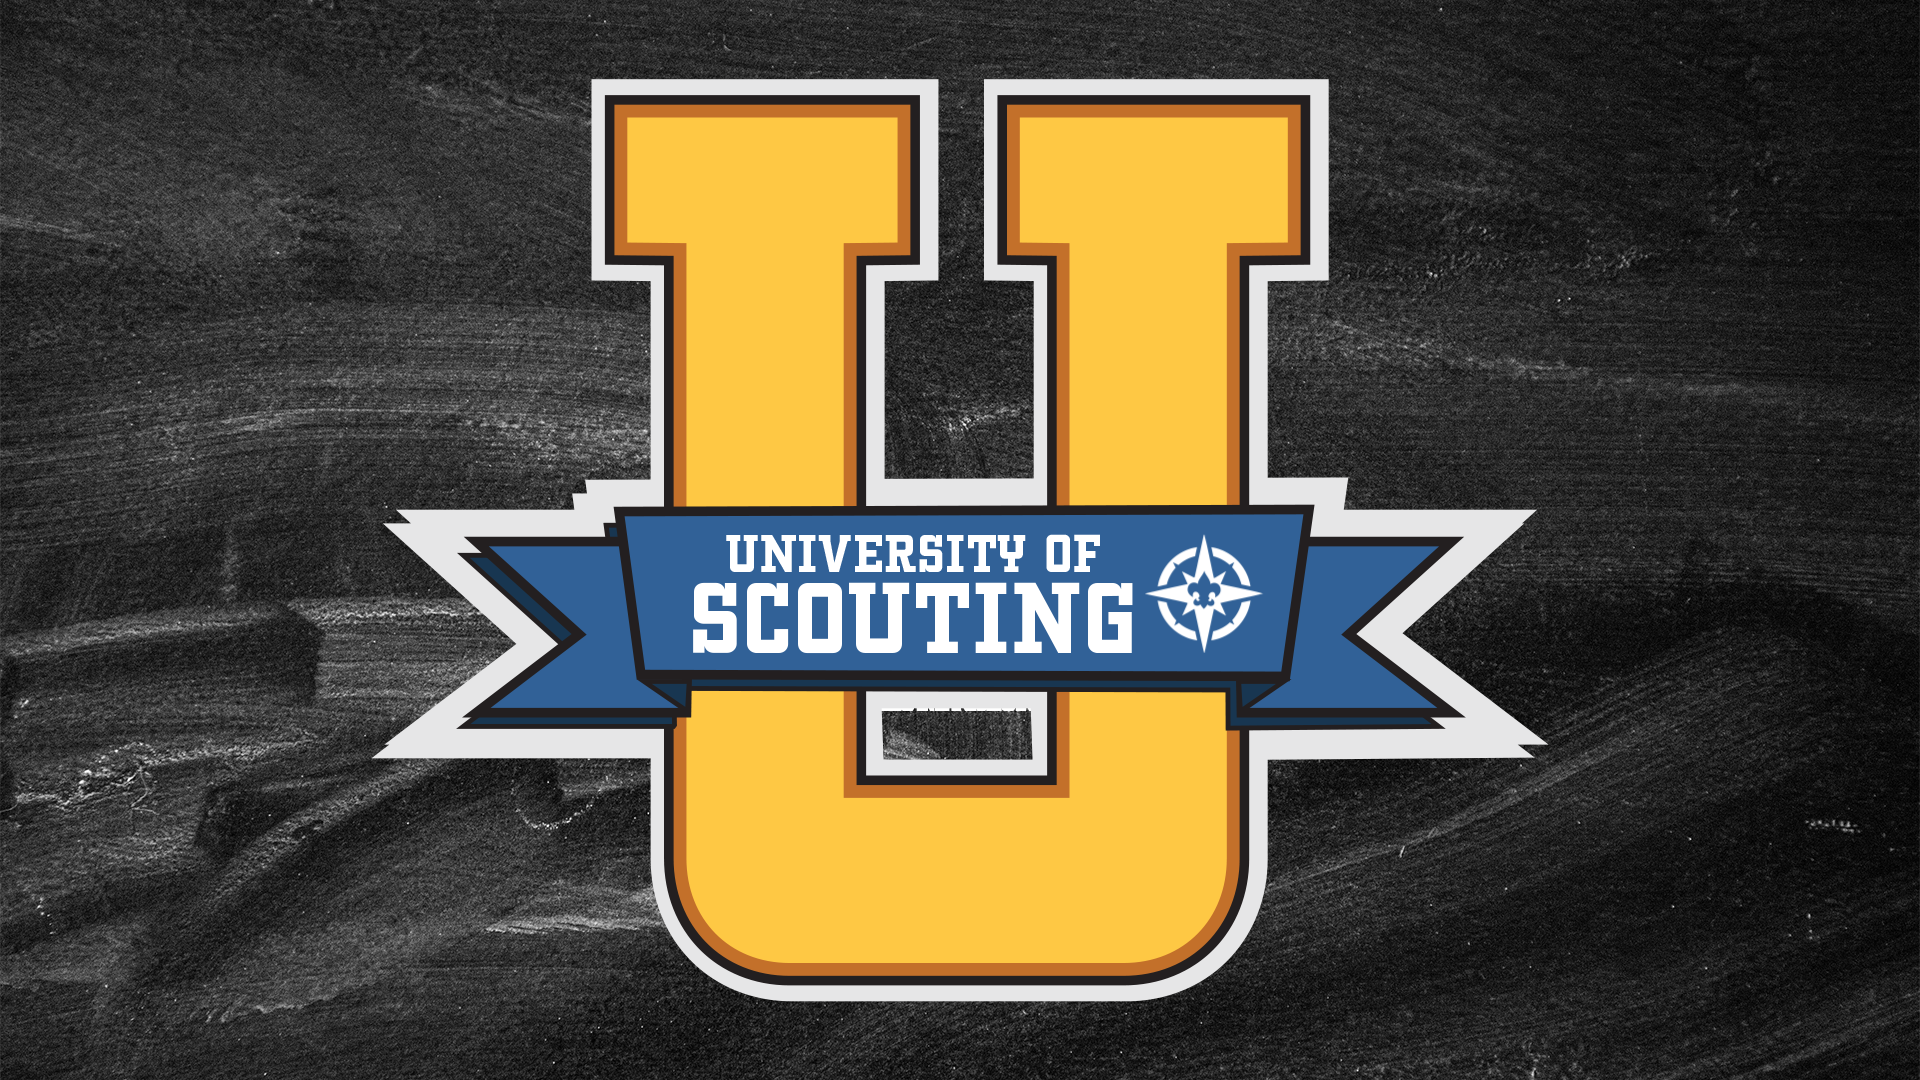 The University of Scouting logo